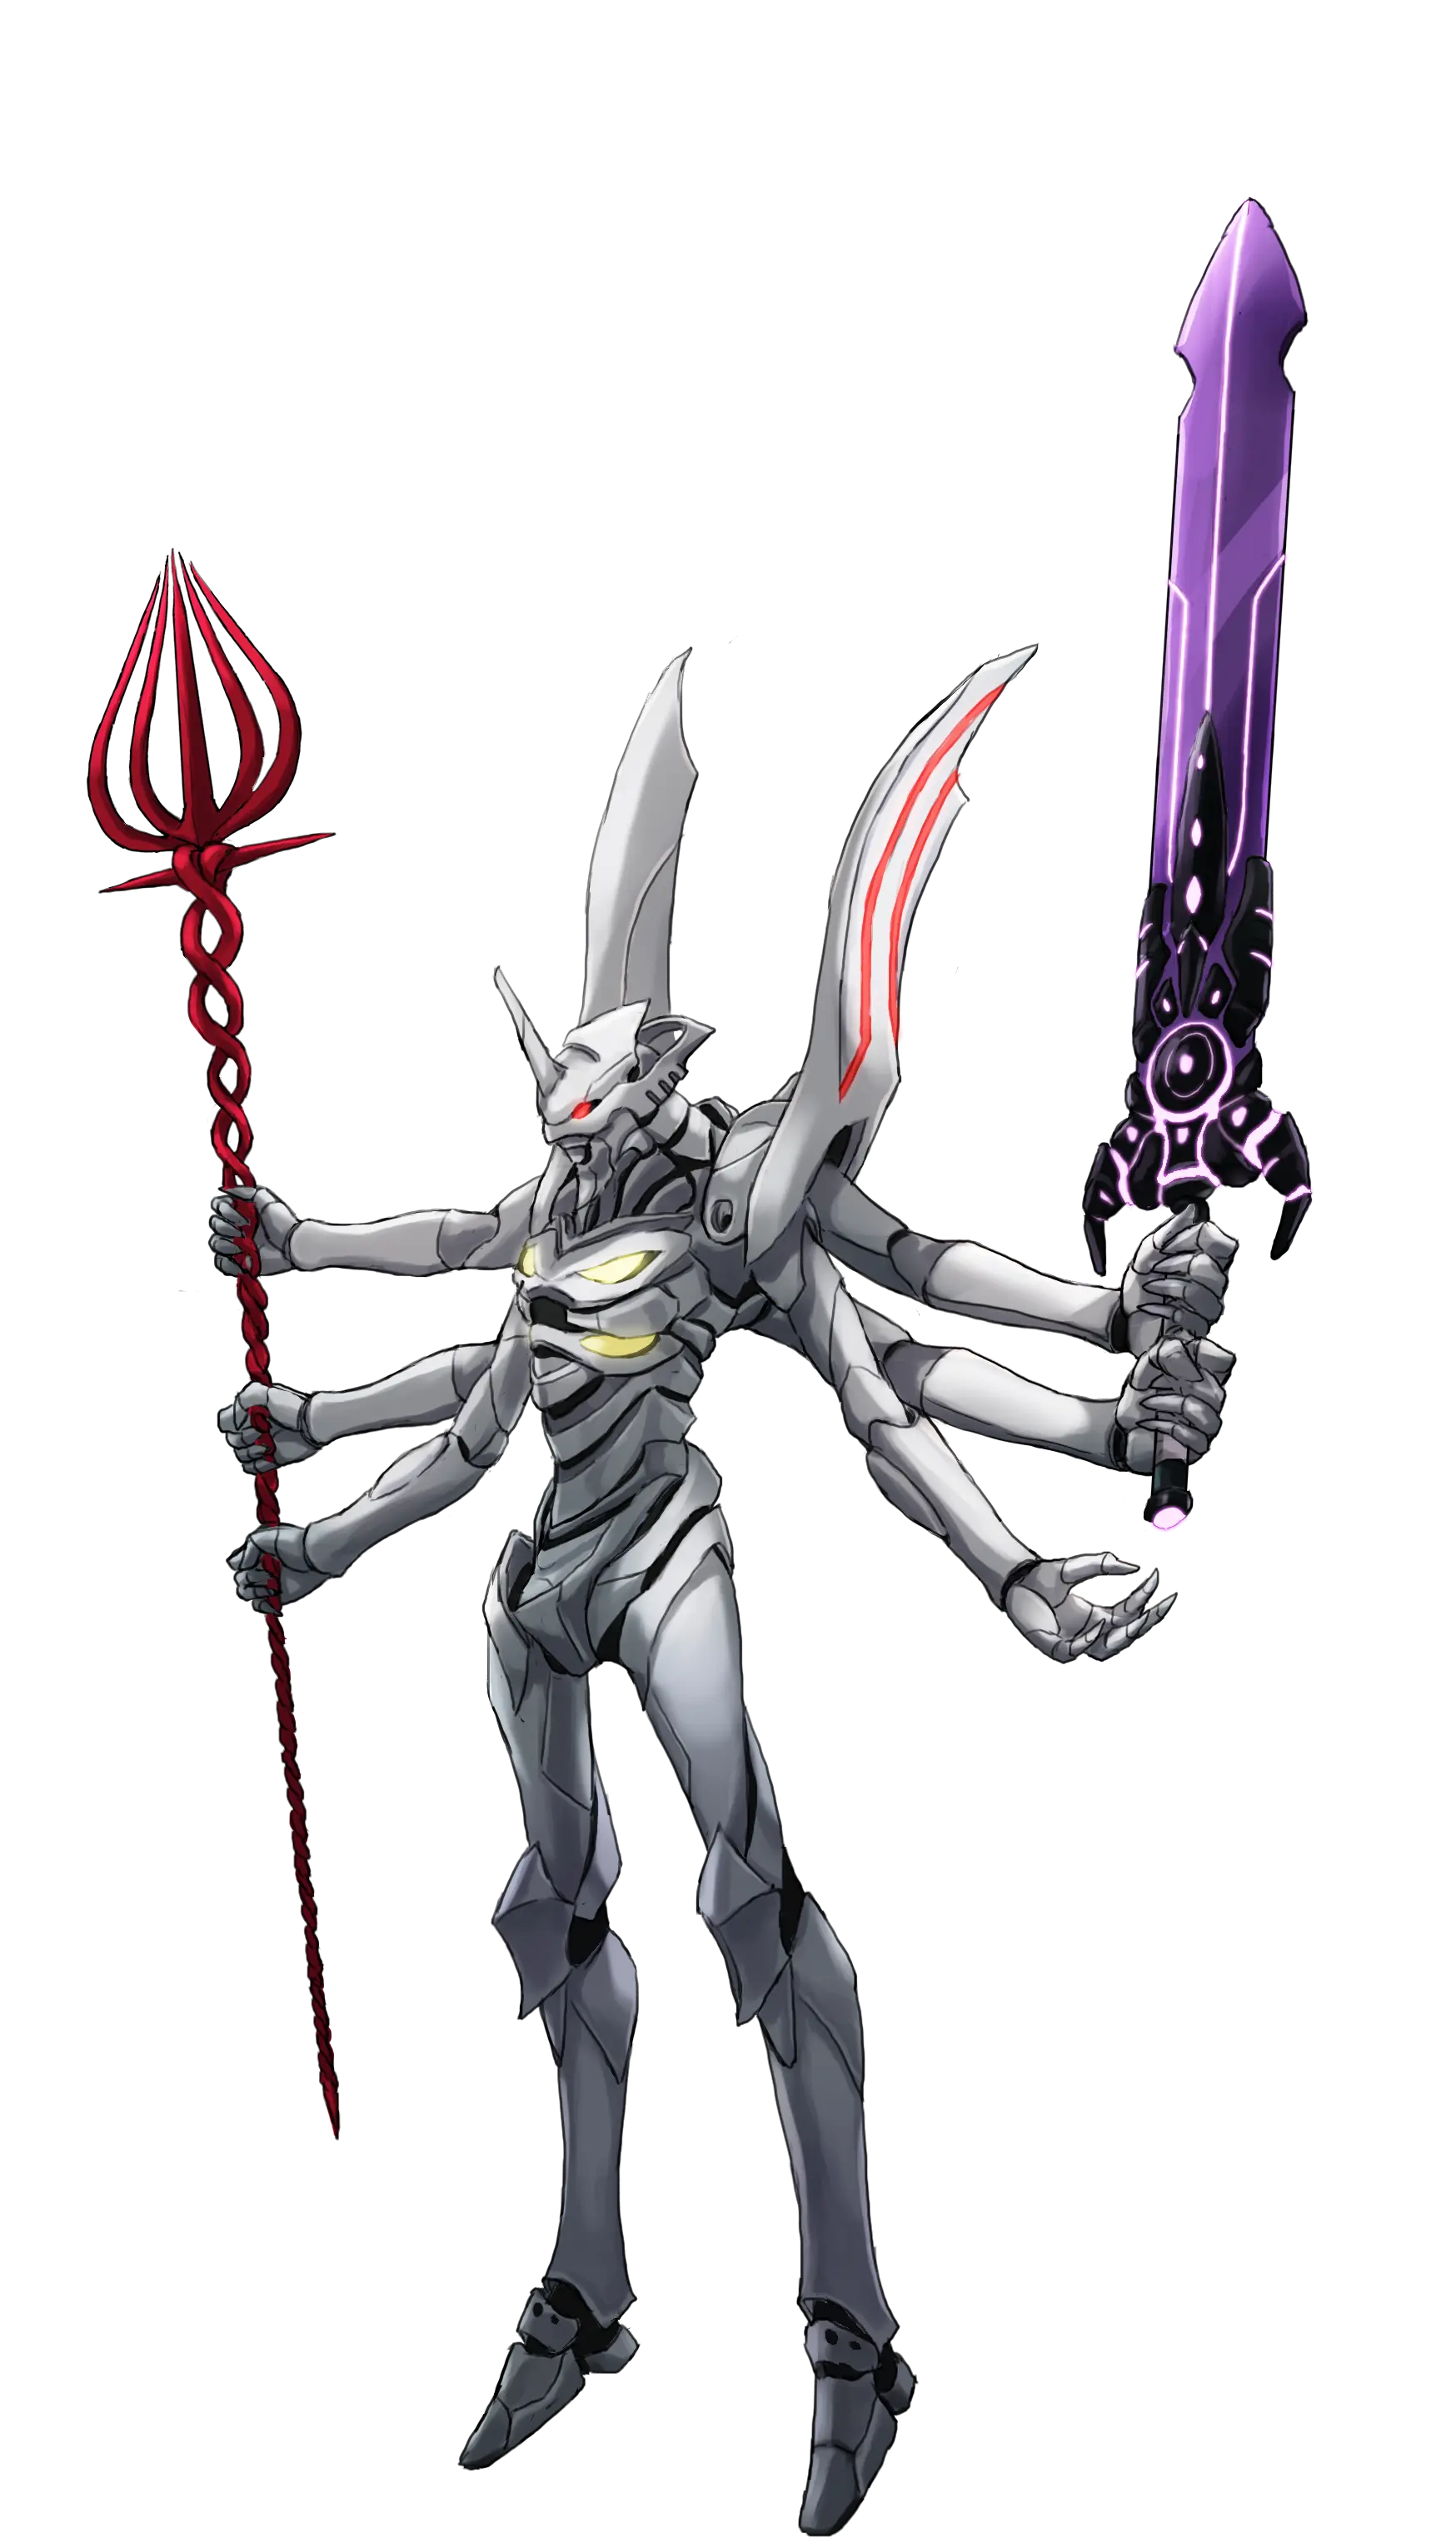 Genesis Augmented Reality hero Hyperxyon holding a red magic staff and a purple sword